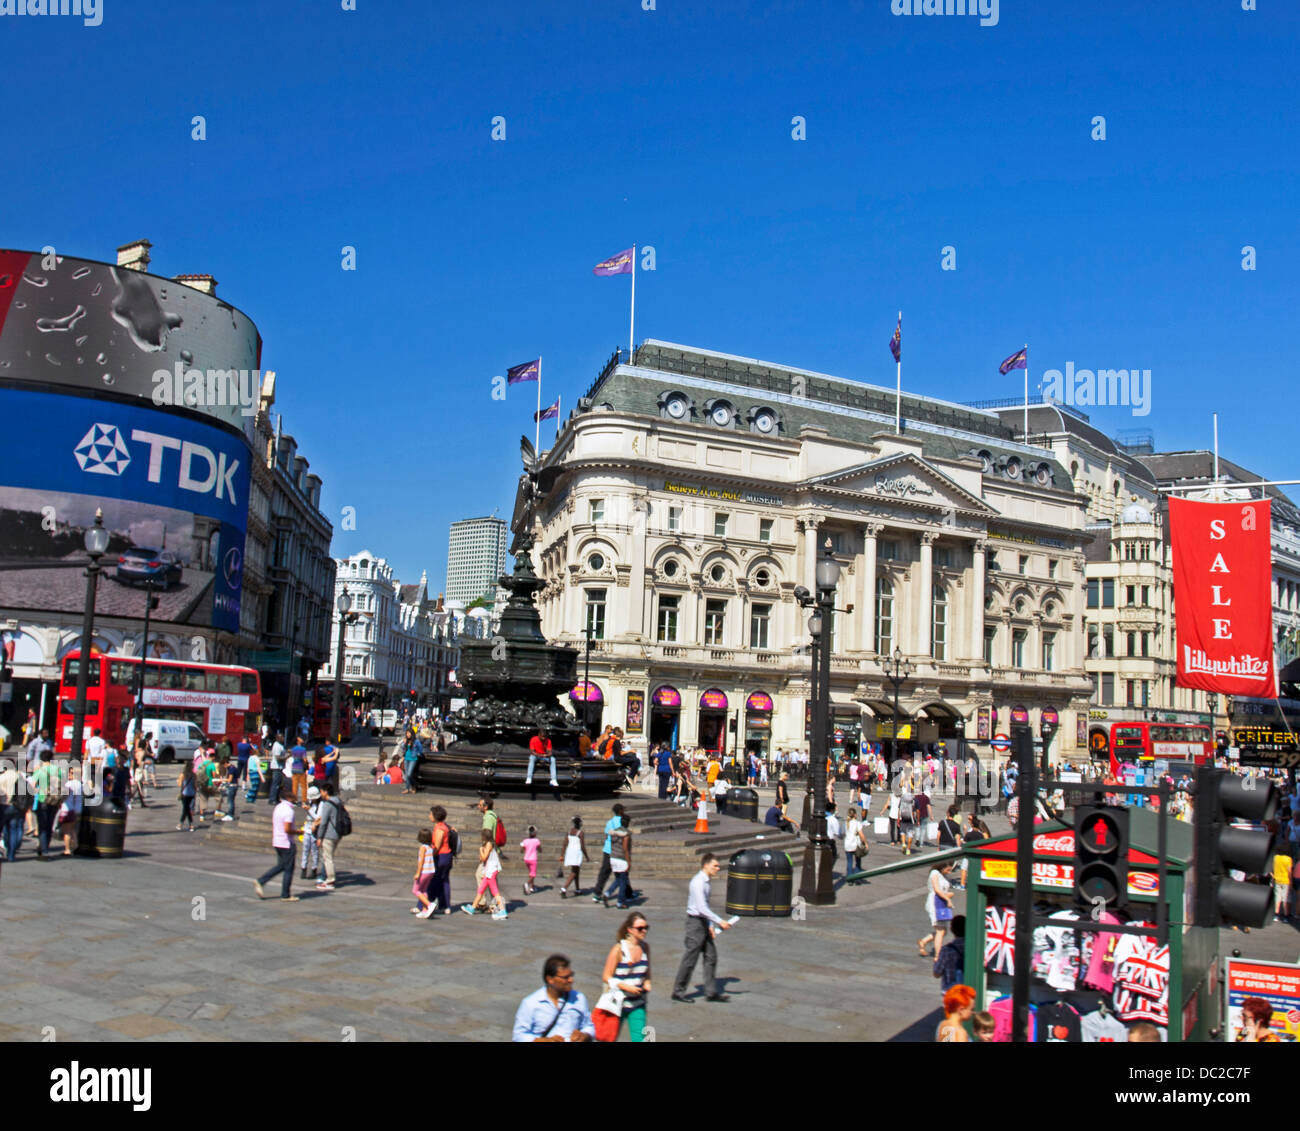 Billboards and advertisements at Piccadilly Circus, London, England, United Kingdom Stock Photo